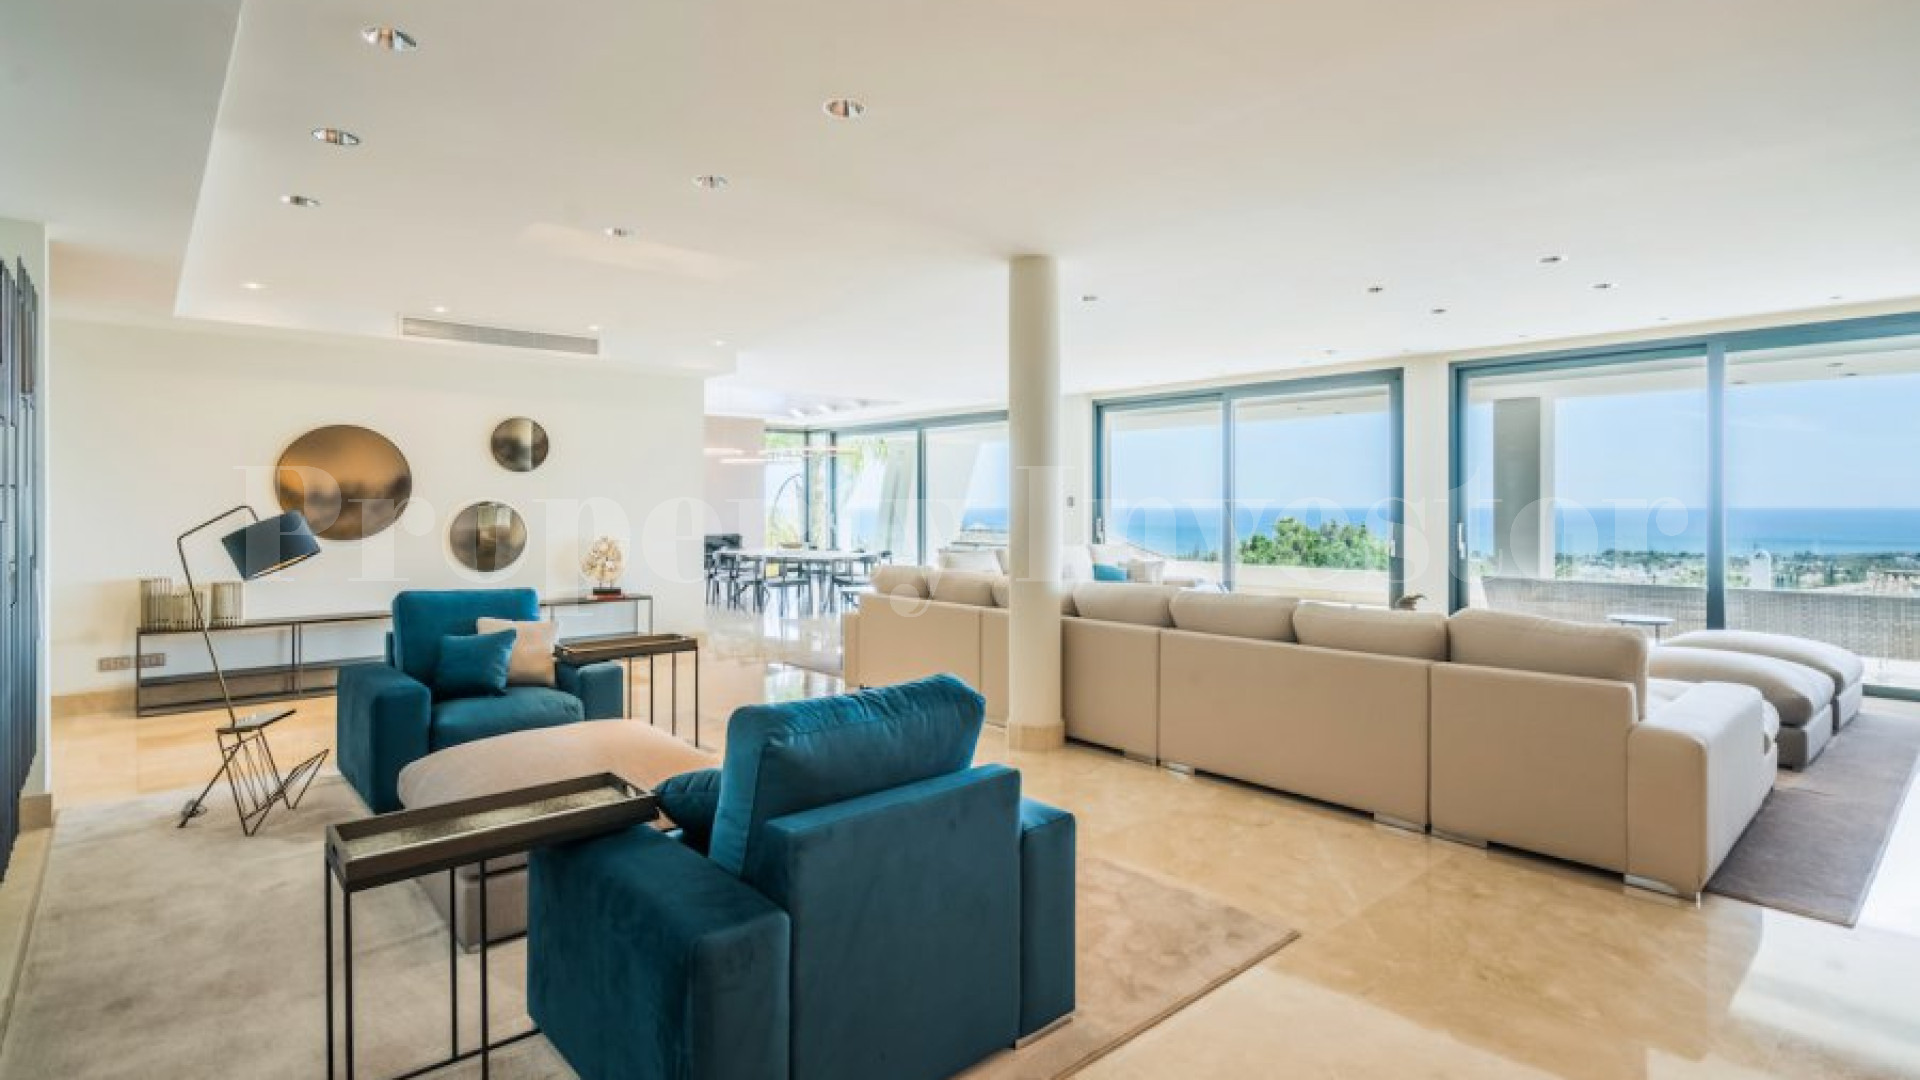 Fabulous 5 Bedroom Duplex Penthouse with Panoramic Sea Views for Sale in Marbella